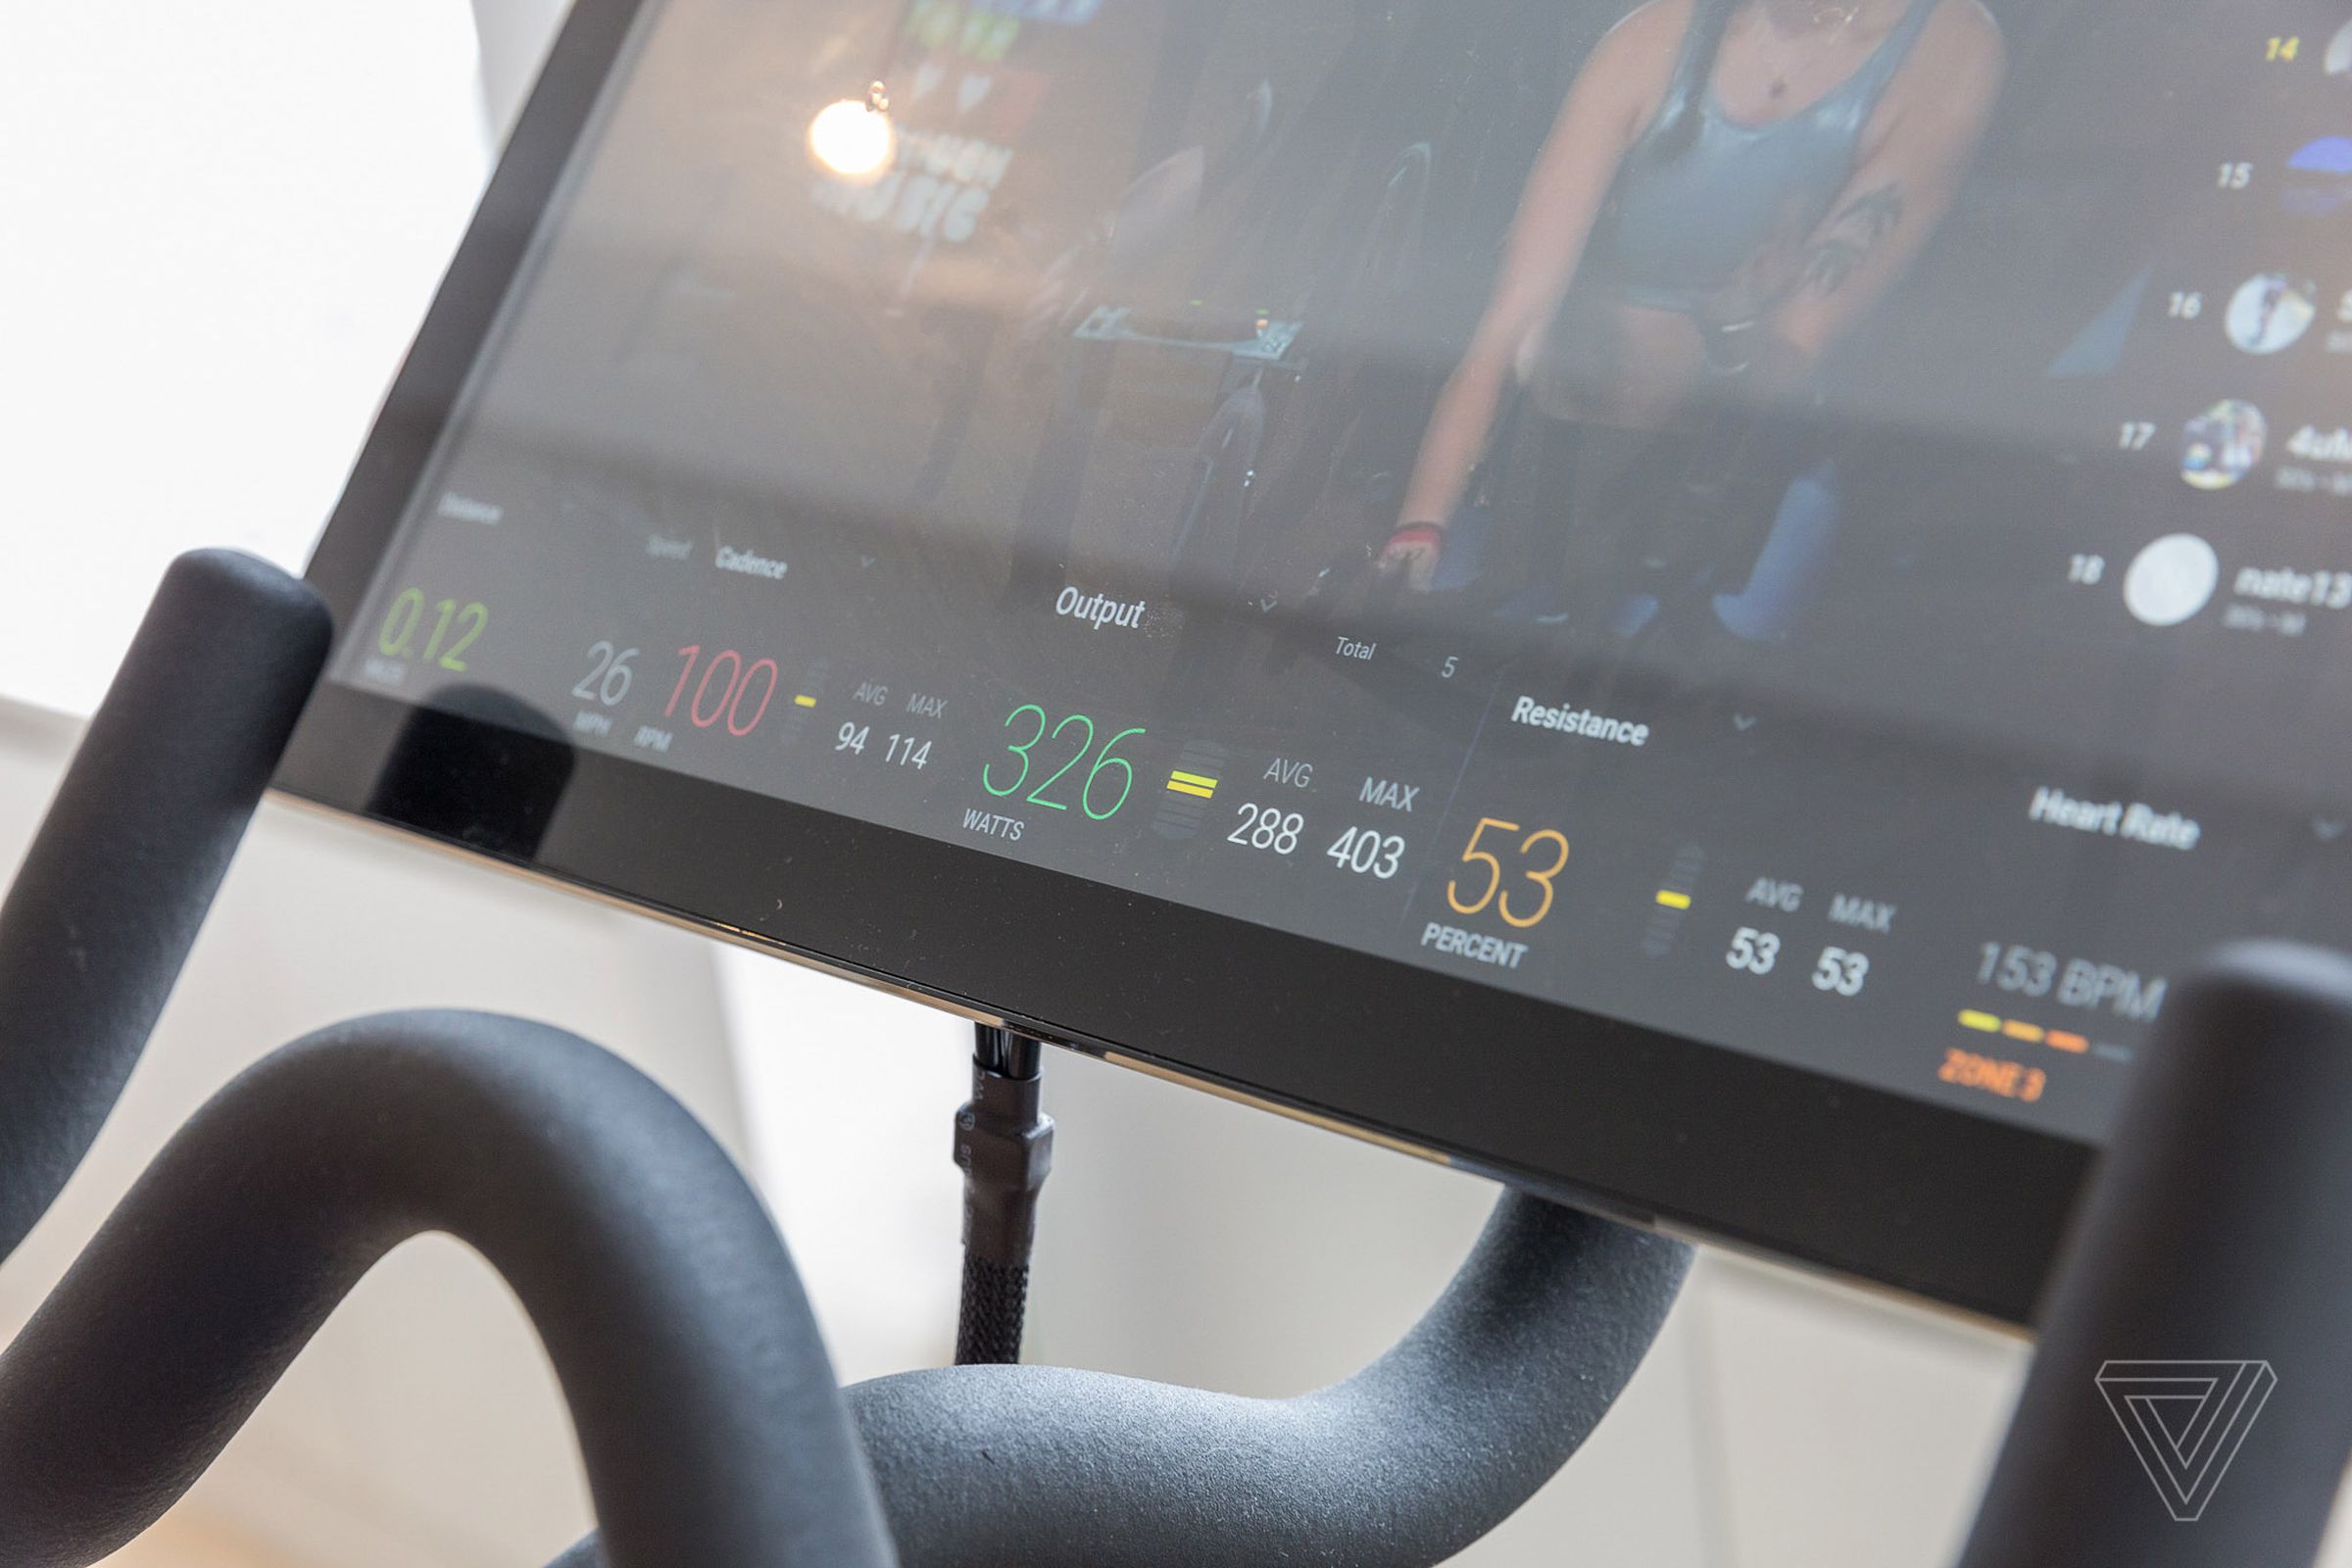 What you’ll see during a class when you’re using Peloton at home.